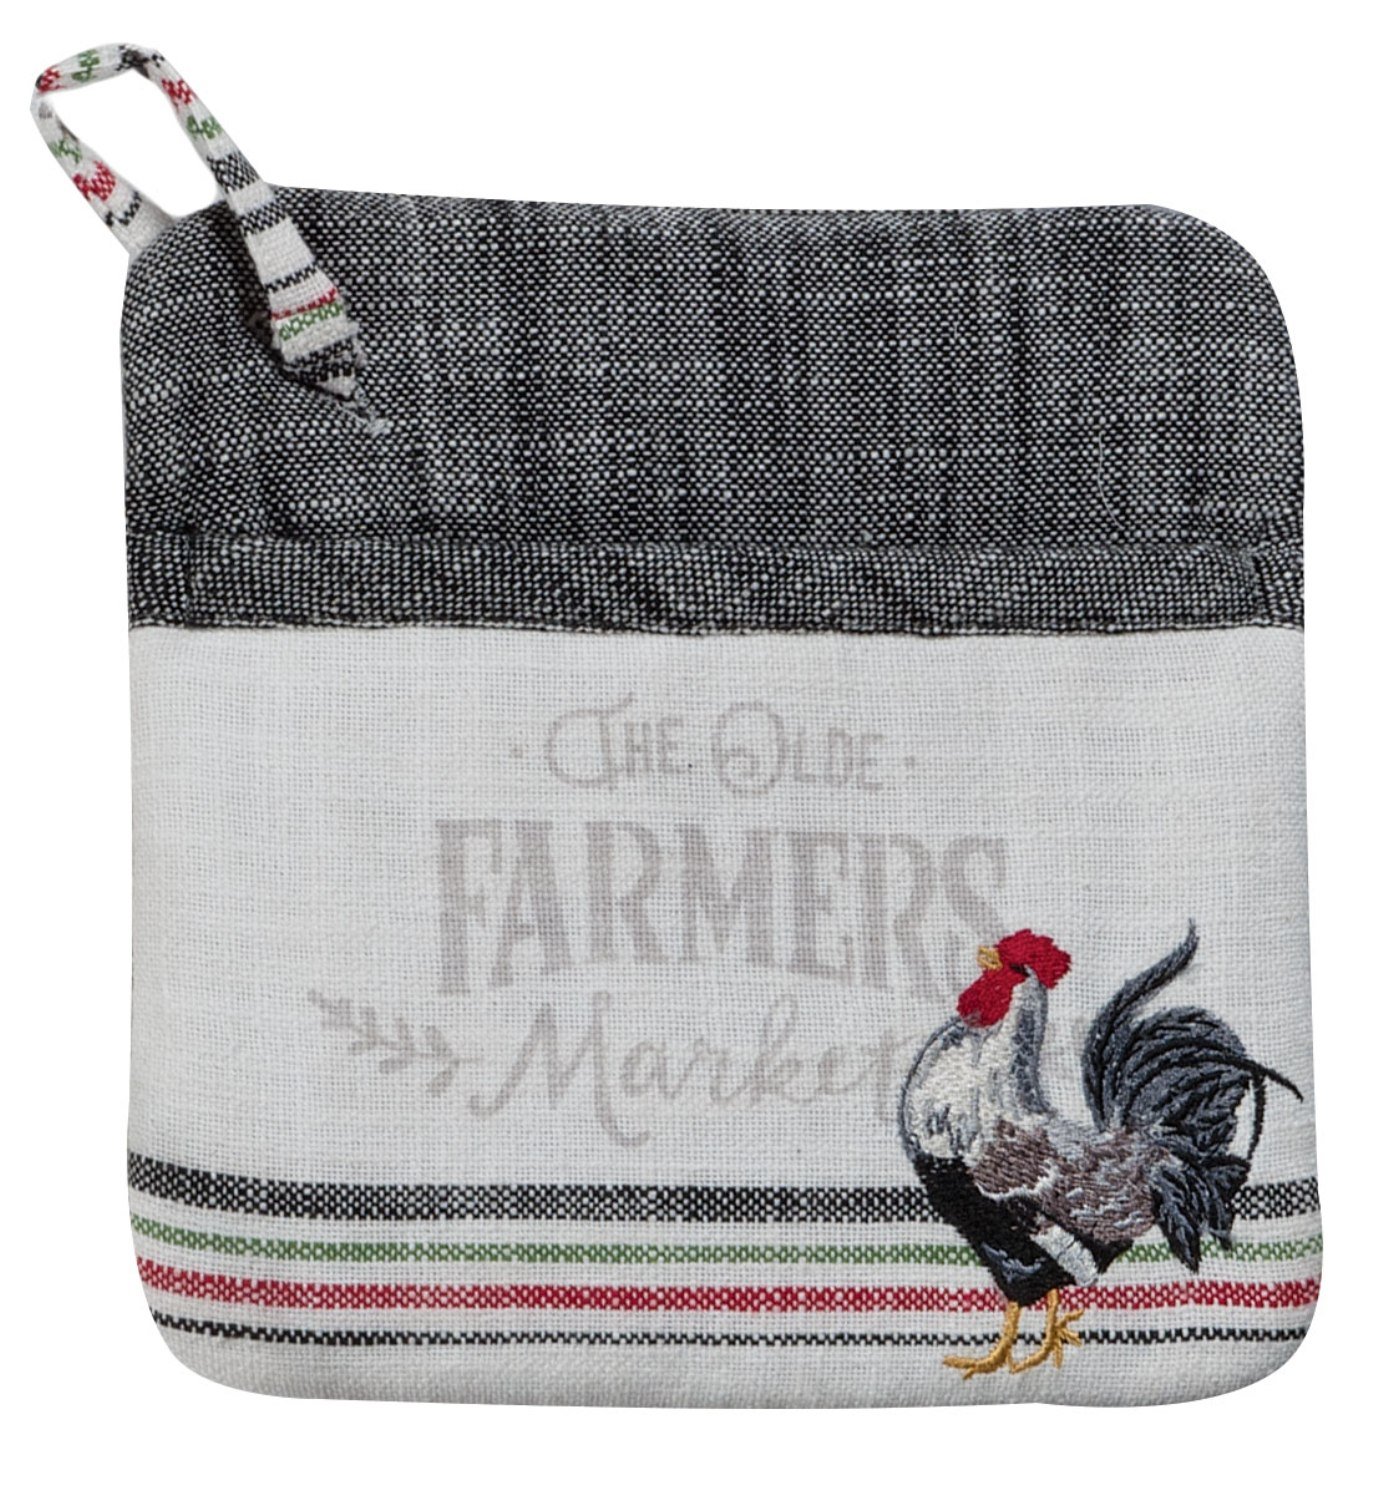 Kay Dee Designs Farmer's Market Rooster Embroidered Pocket Mitt, 8" x 8", Various